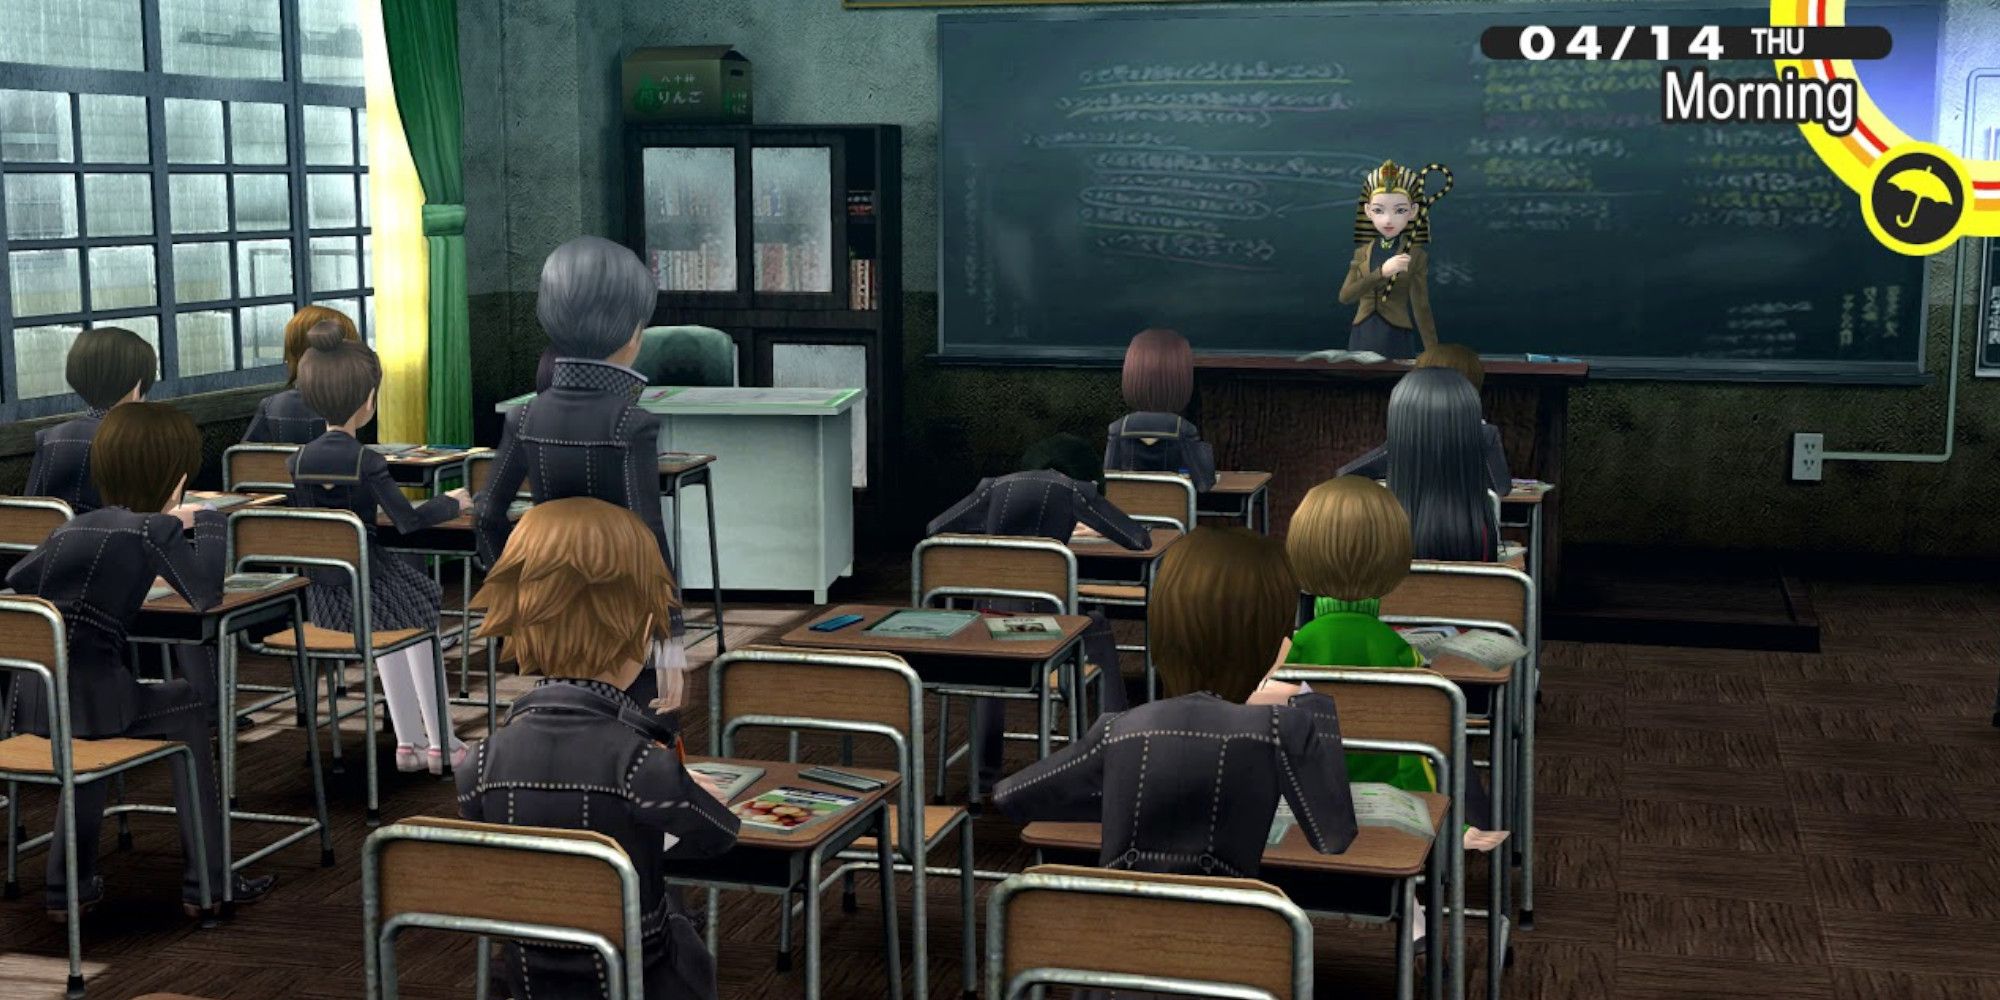 Yu Narukami answering questions in class during Persona 4 Golden